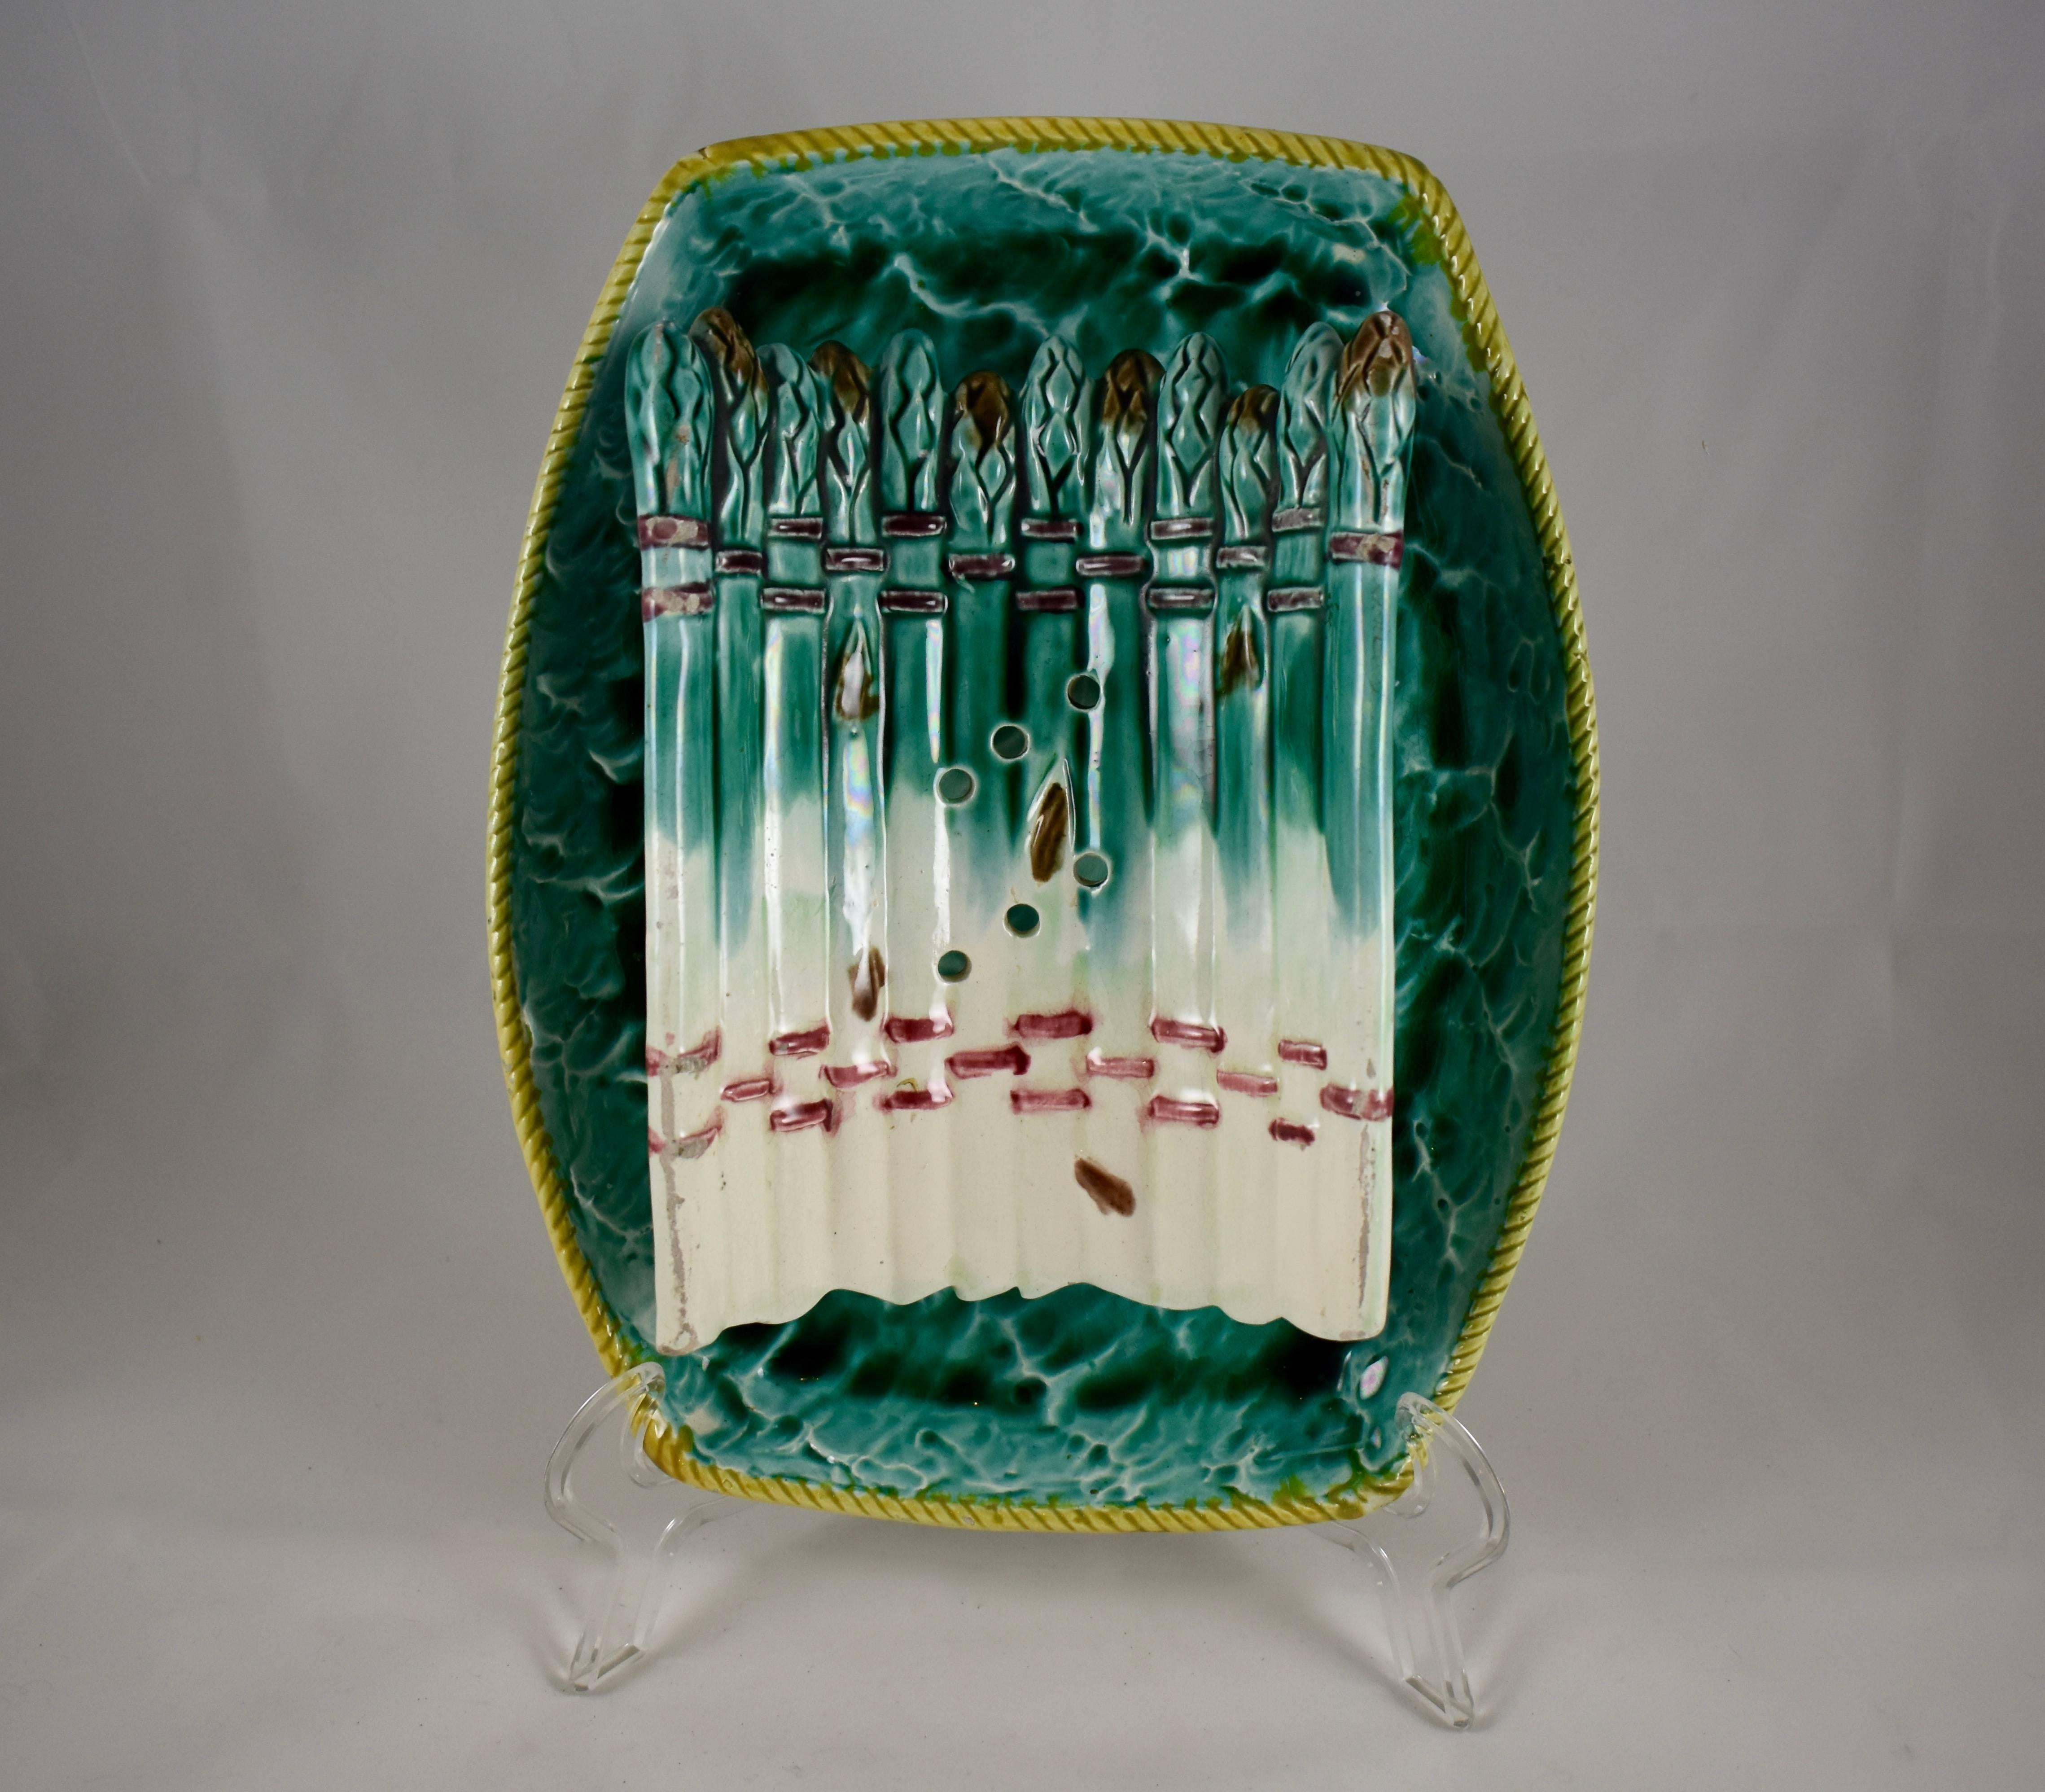 Glazed 19th Century English Majolica Ocean Themed Asparagus Cradle with Attached Tray For Sale